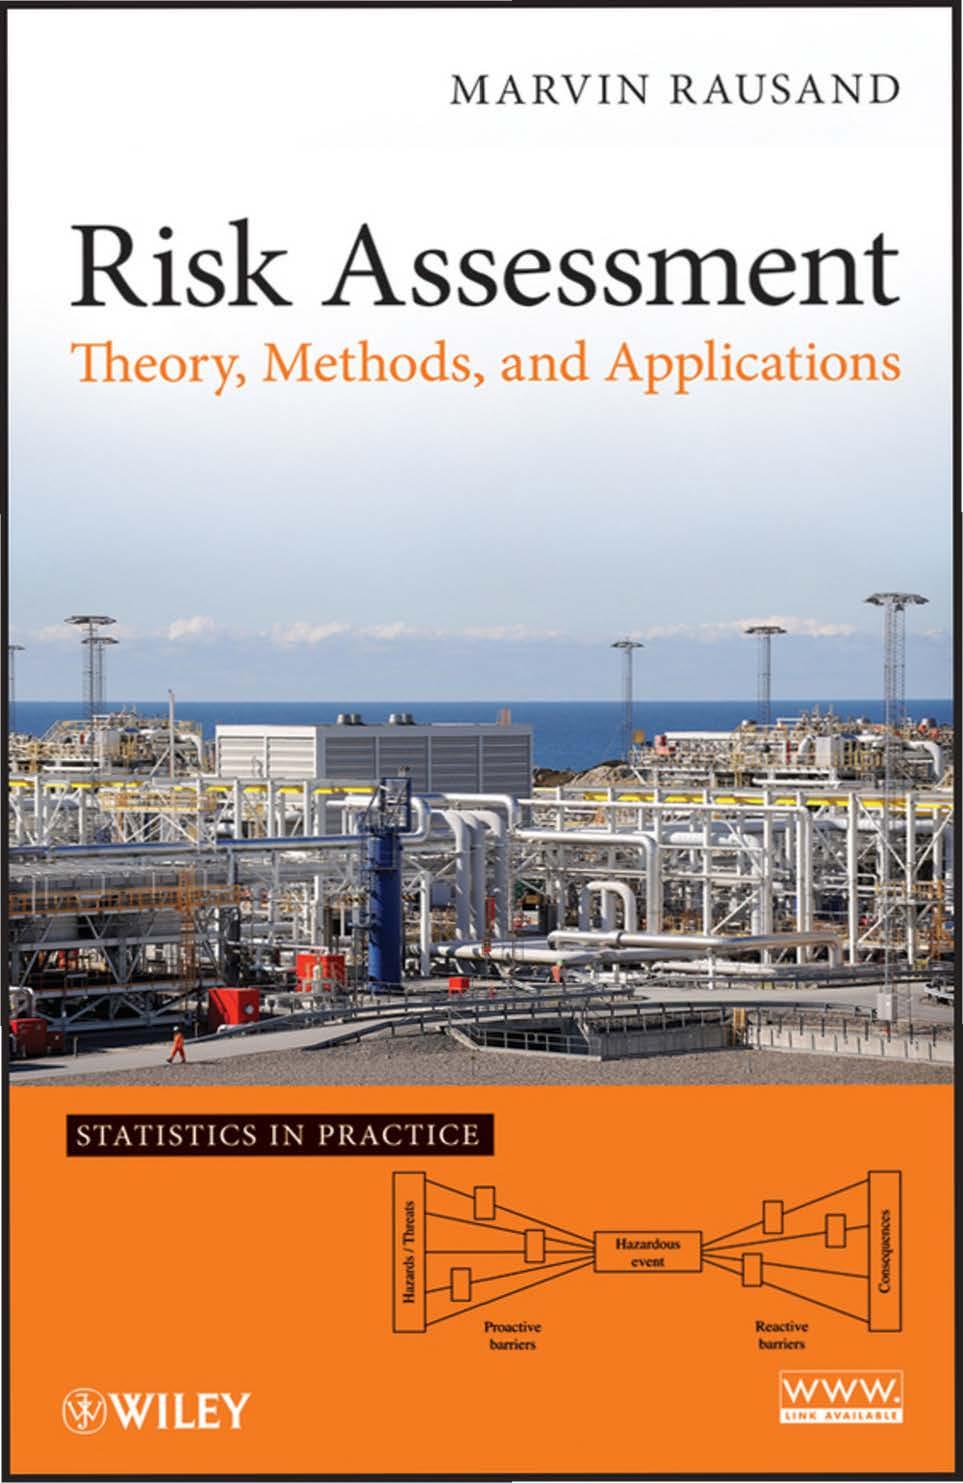 MARVIN RAUSAND Risk Assessment Theory,